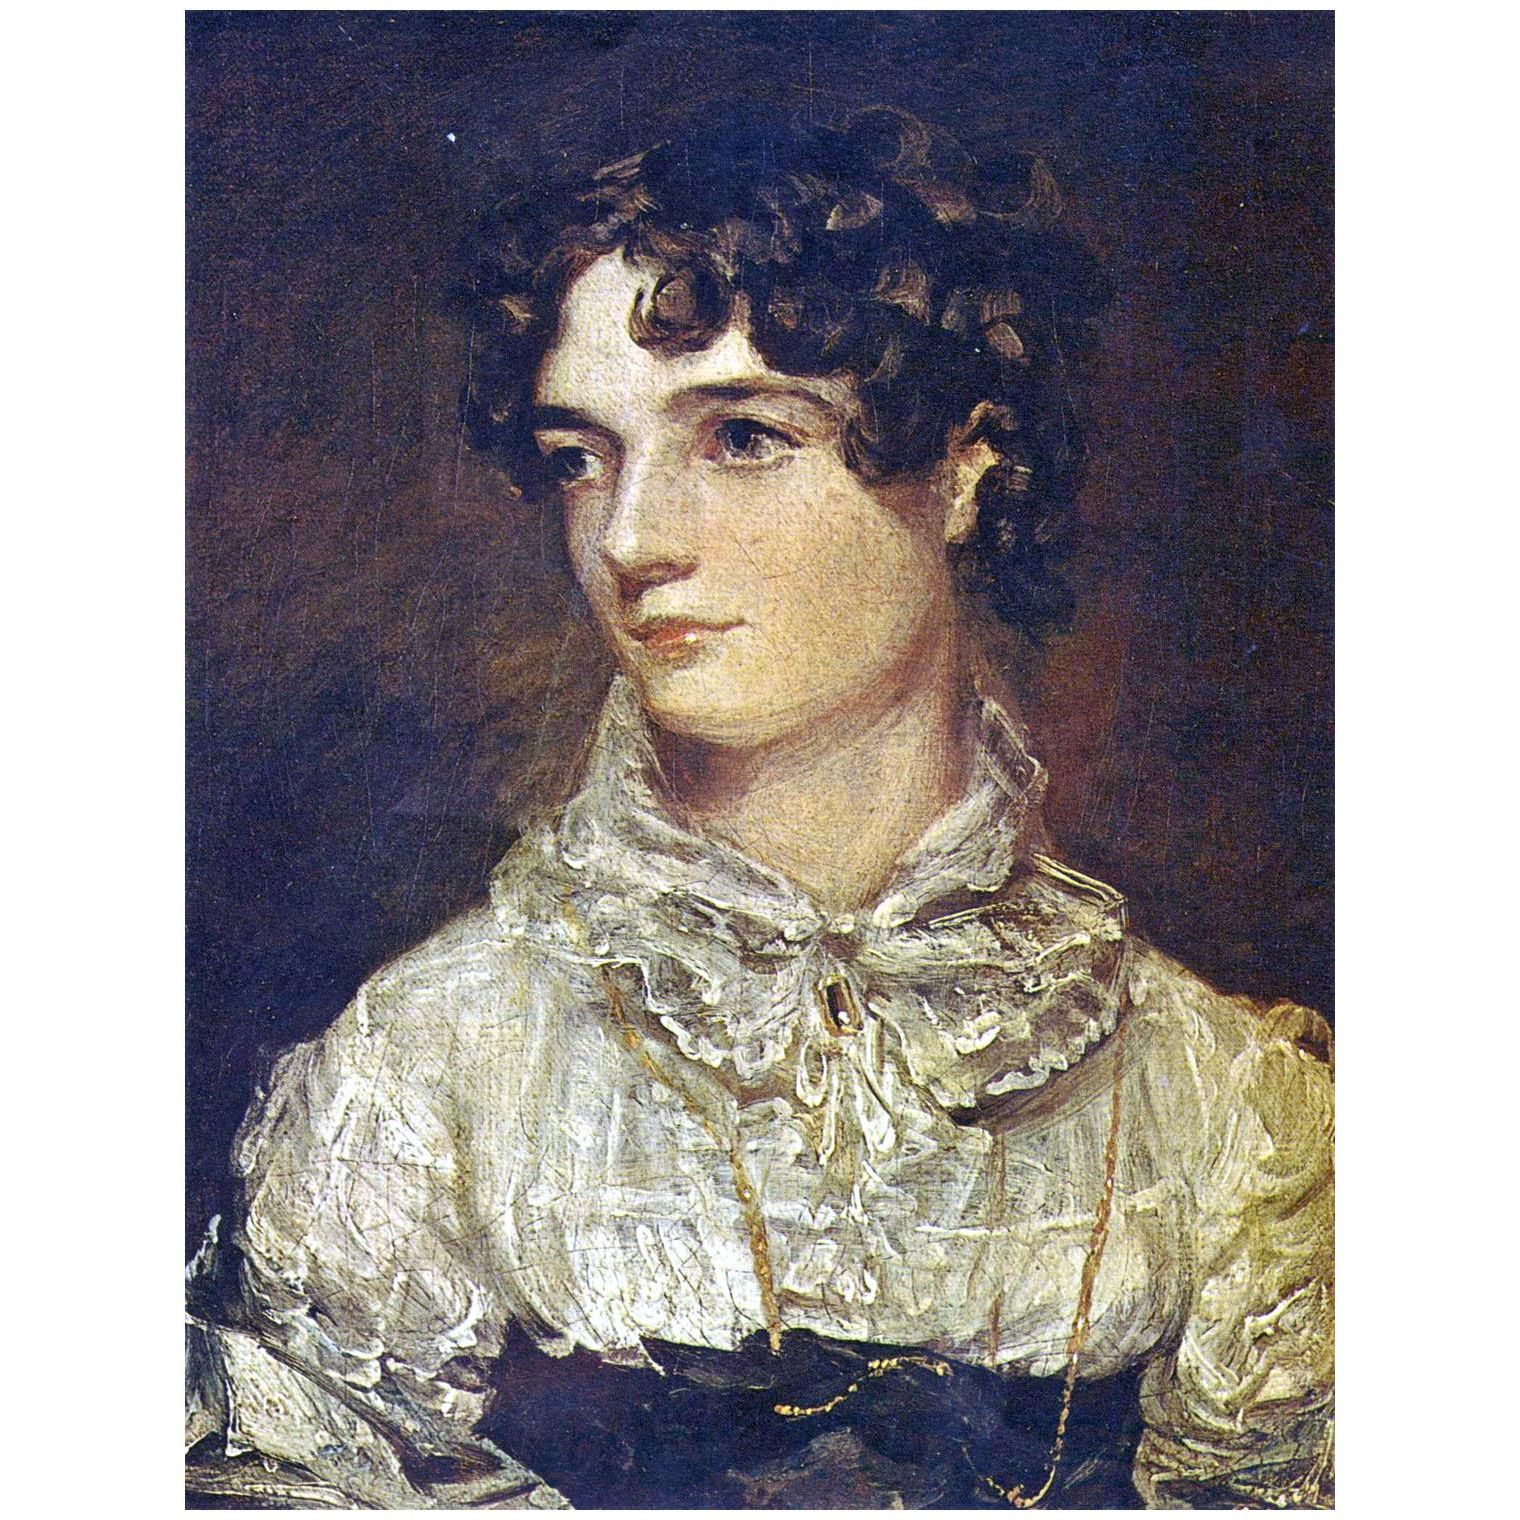 John Constable. Portrait of Maria Bicknell. 1816. Tate Britain